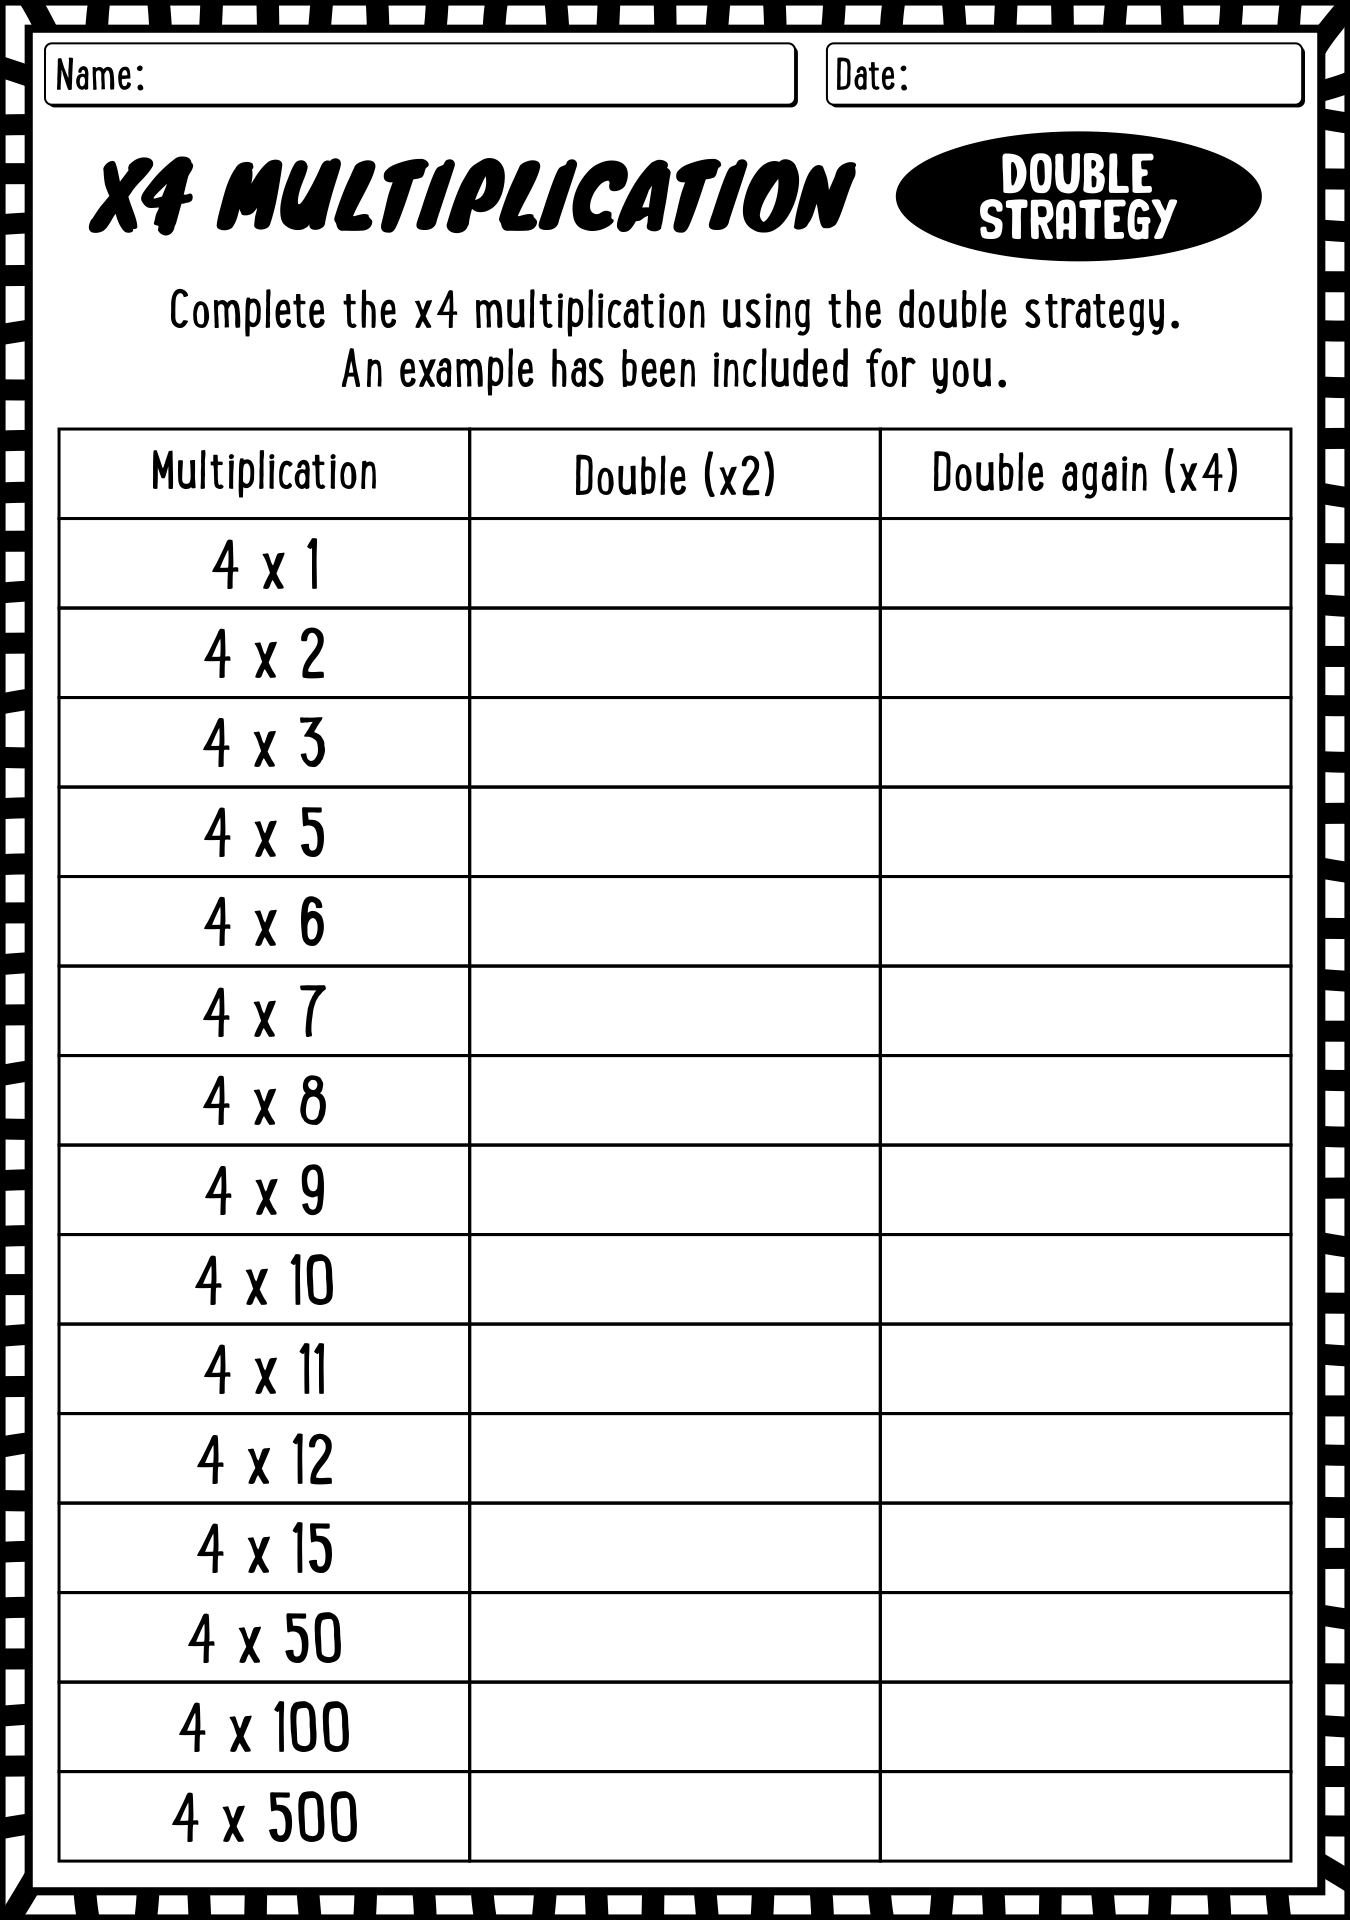 X4 Multiplication Double Strategy Worksheet